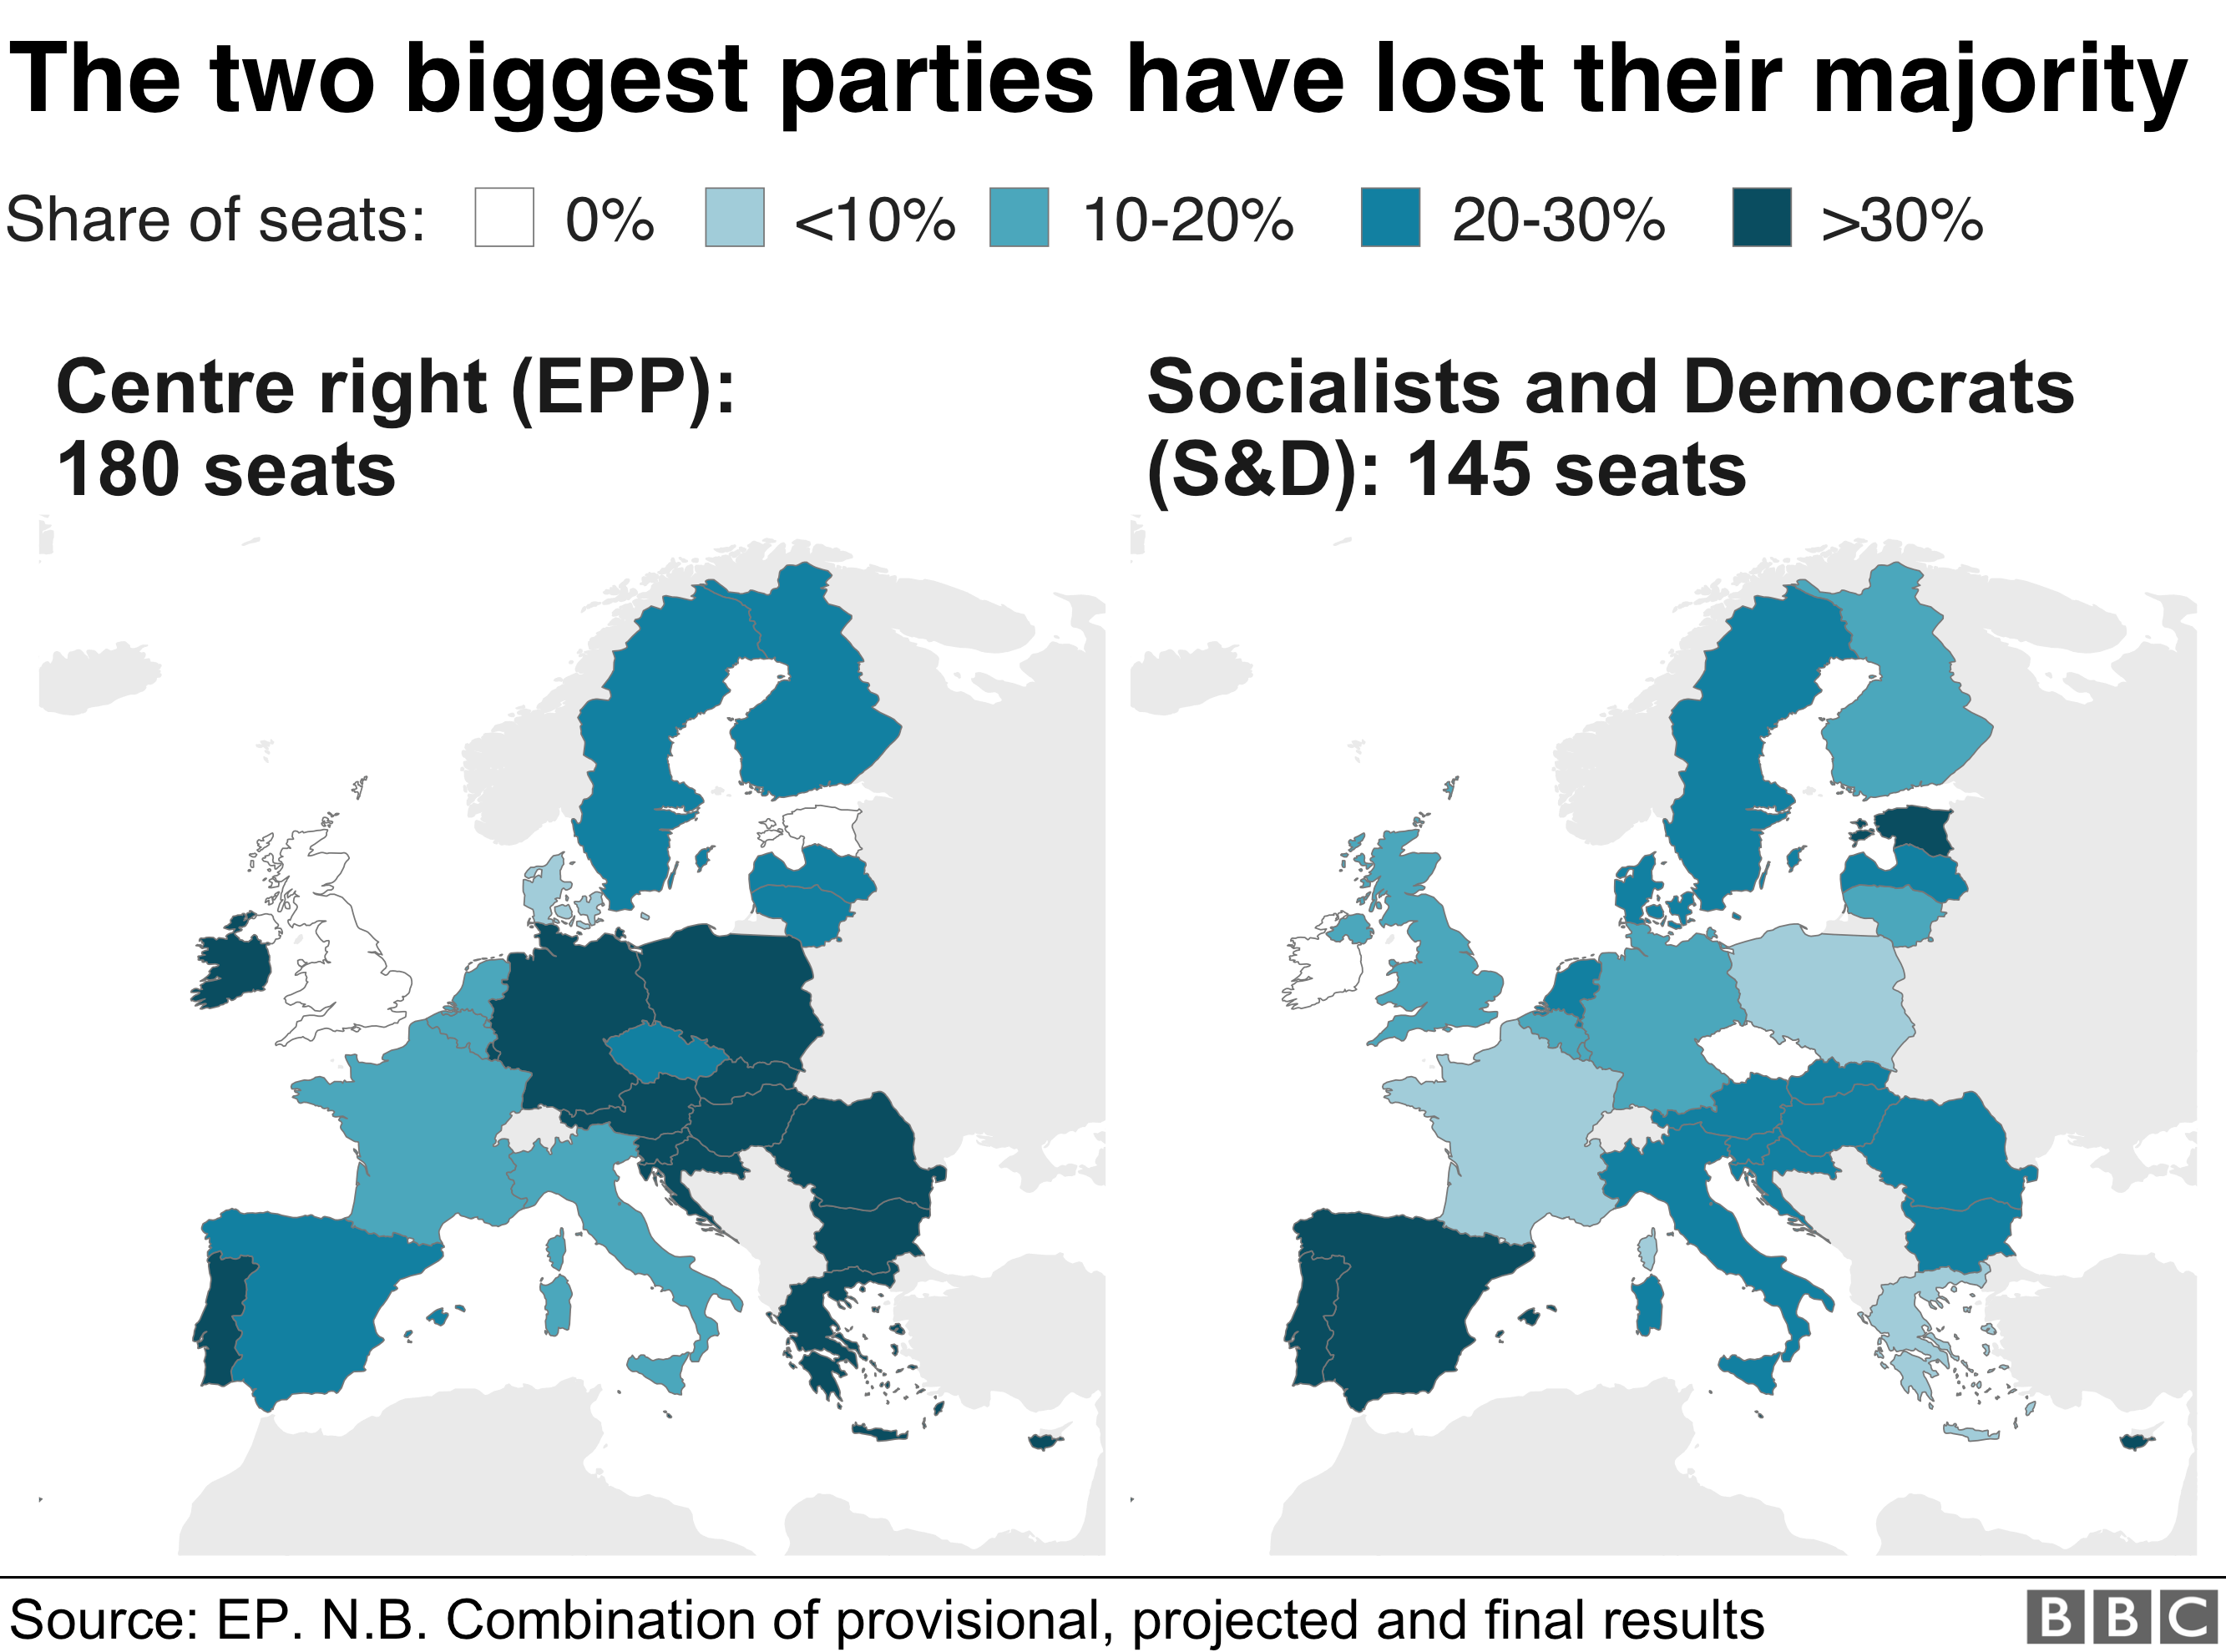 Party strength mapped across Europe